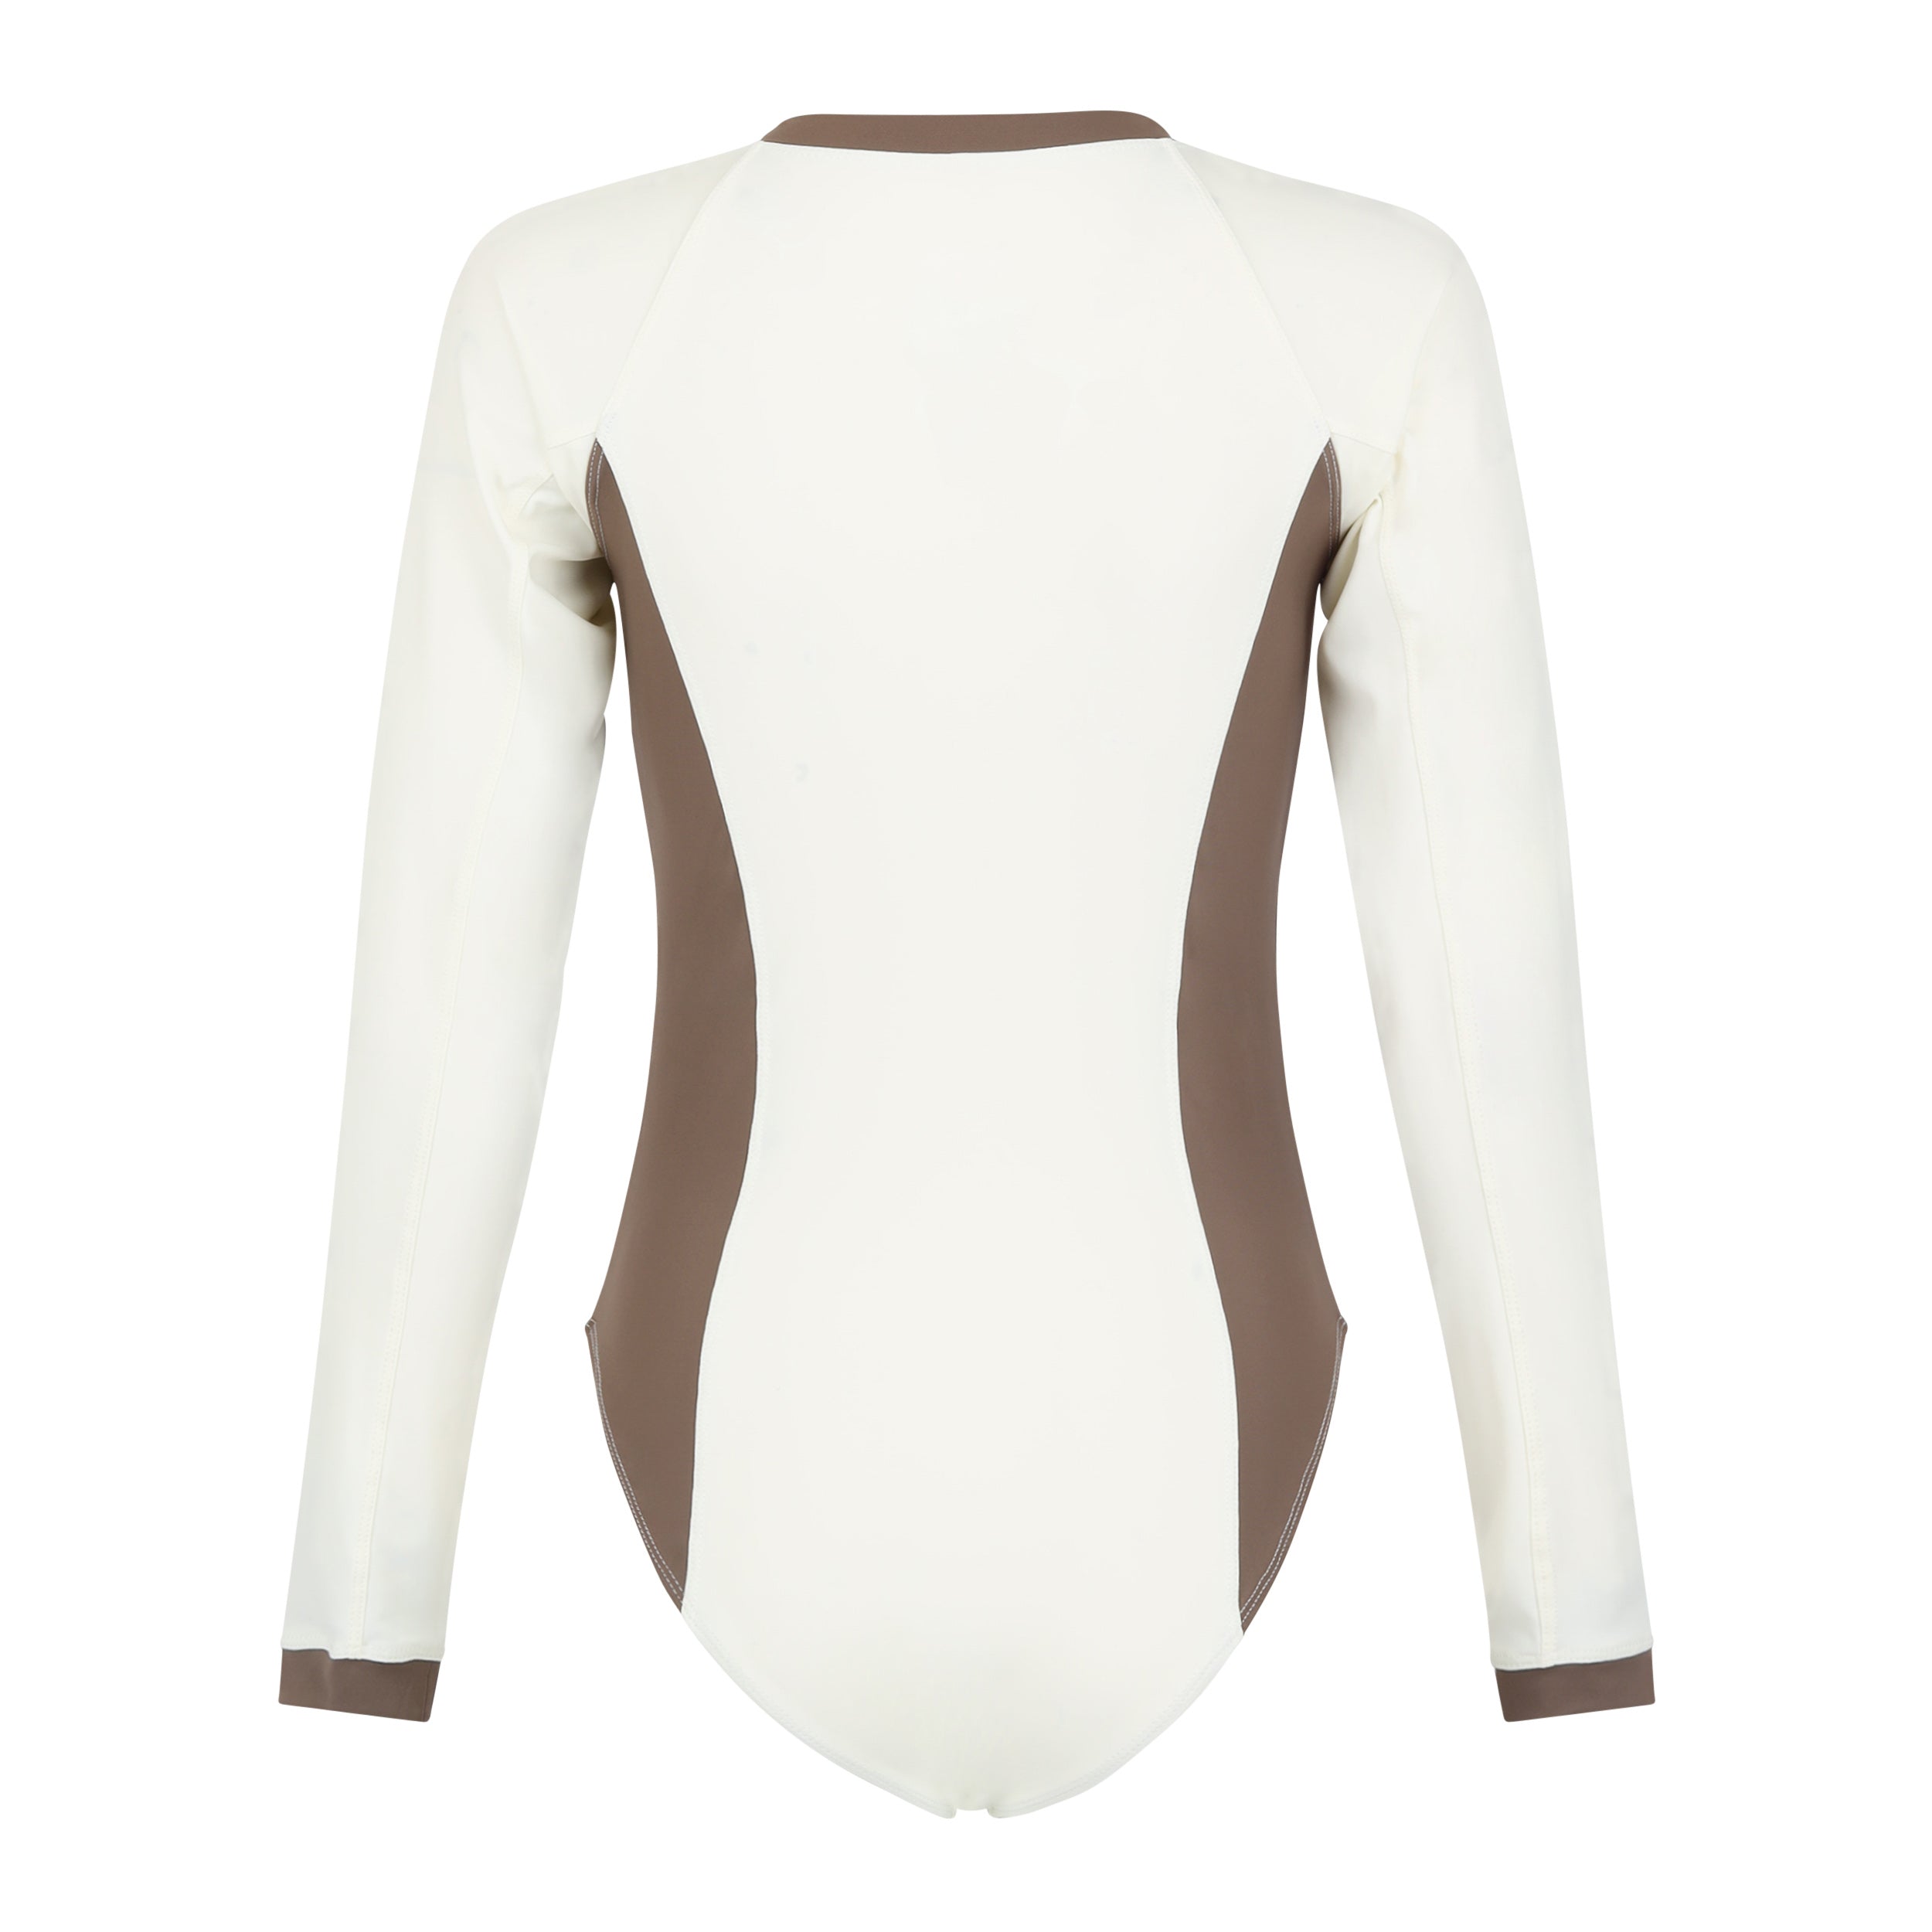 Cardiff Surf Suit - Pearl